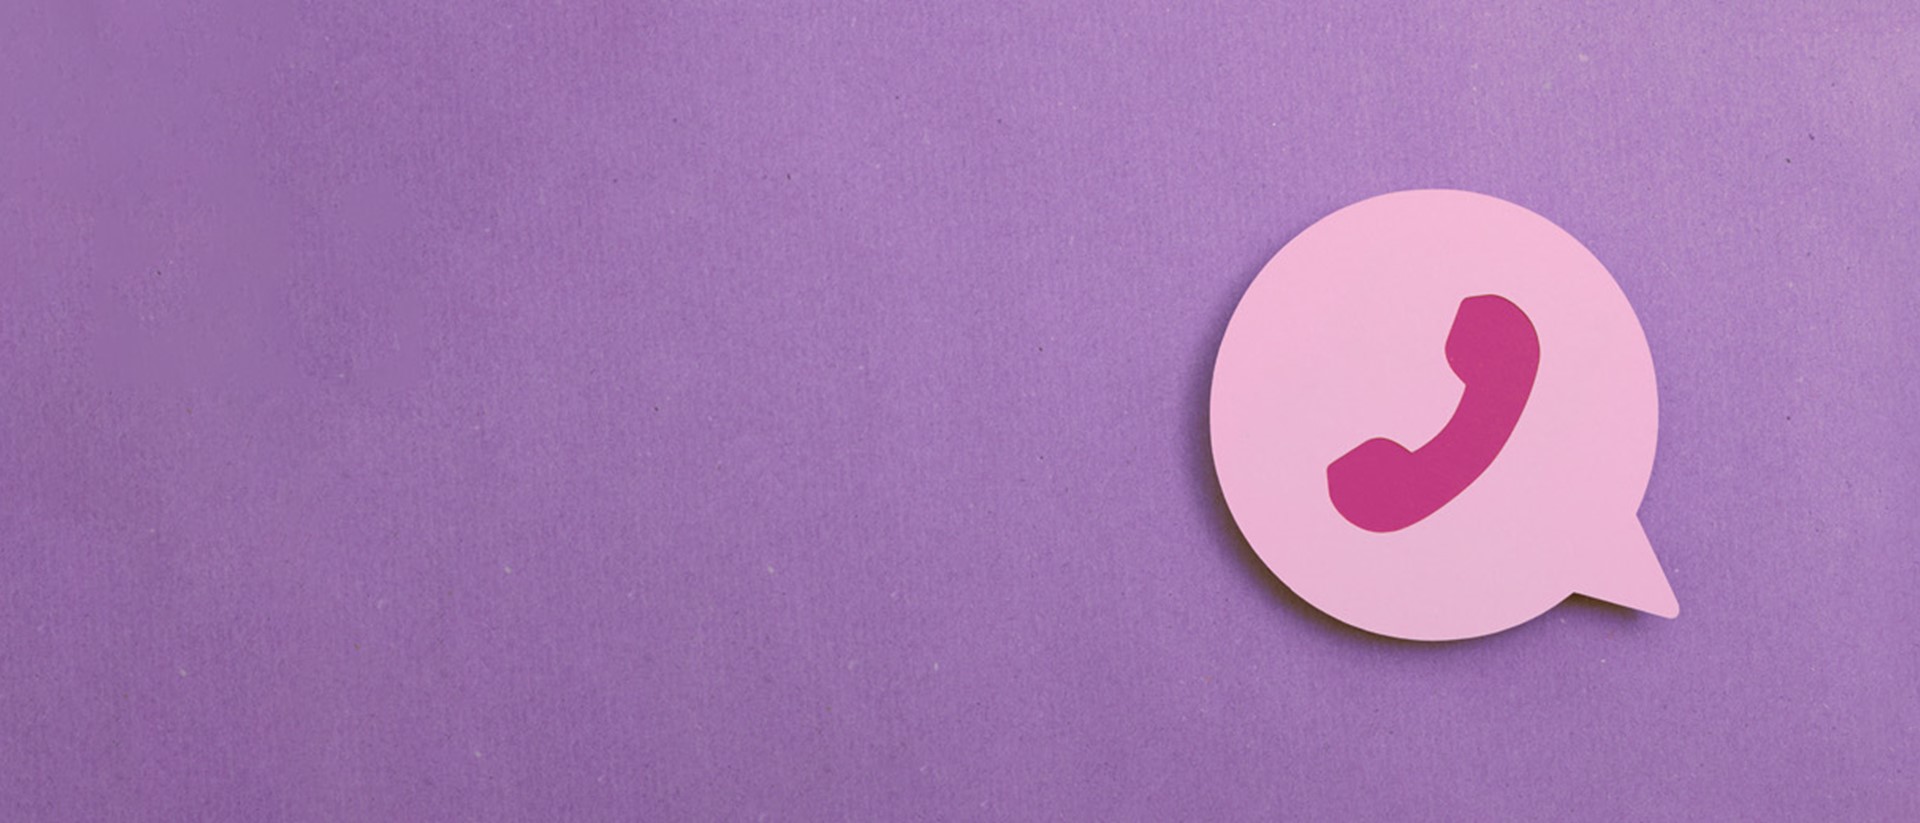 Image of a pink phone icon against a purple background